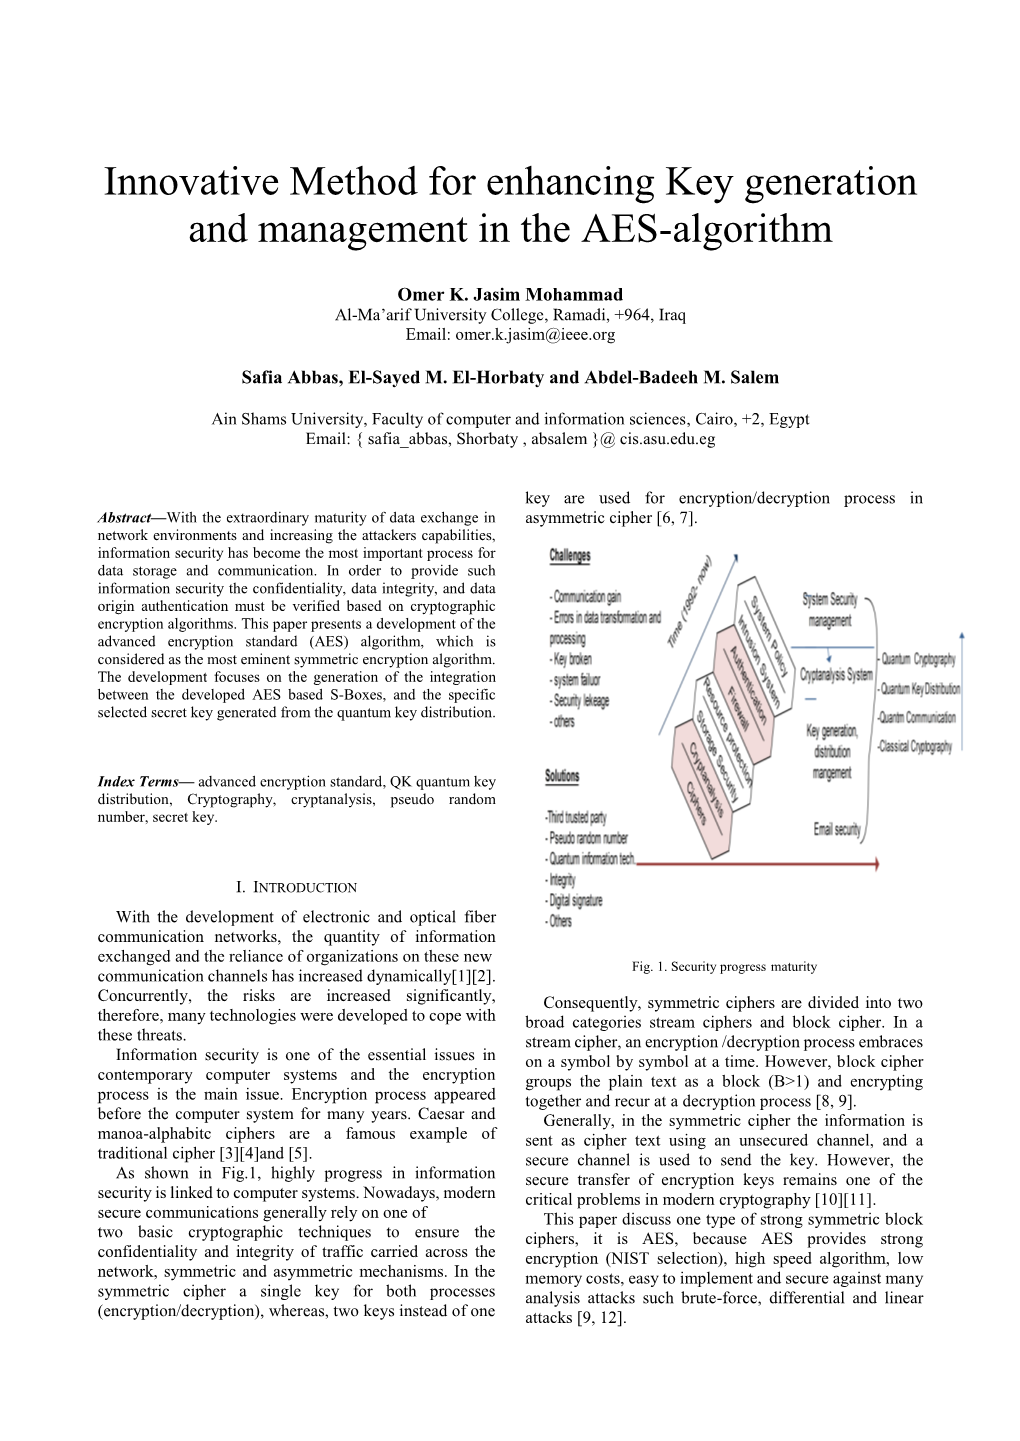 Innovative Method for Enhancing Key Generation and Management in the AES-Algorithm